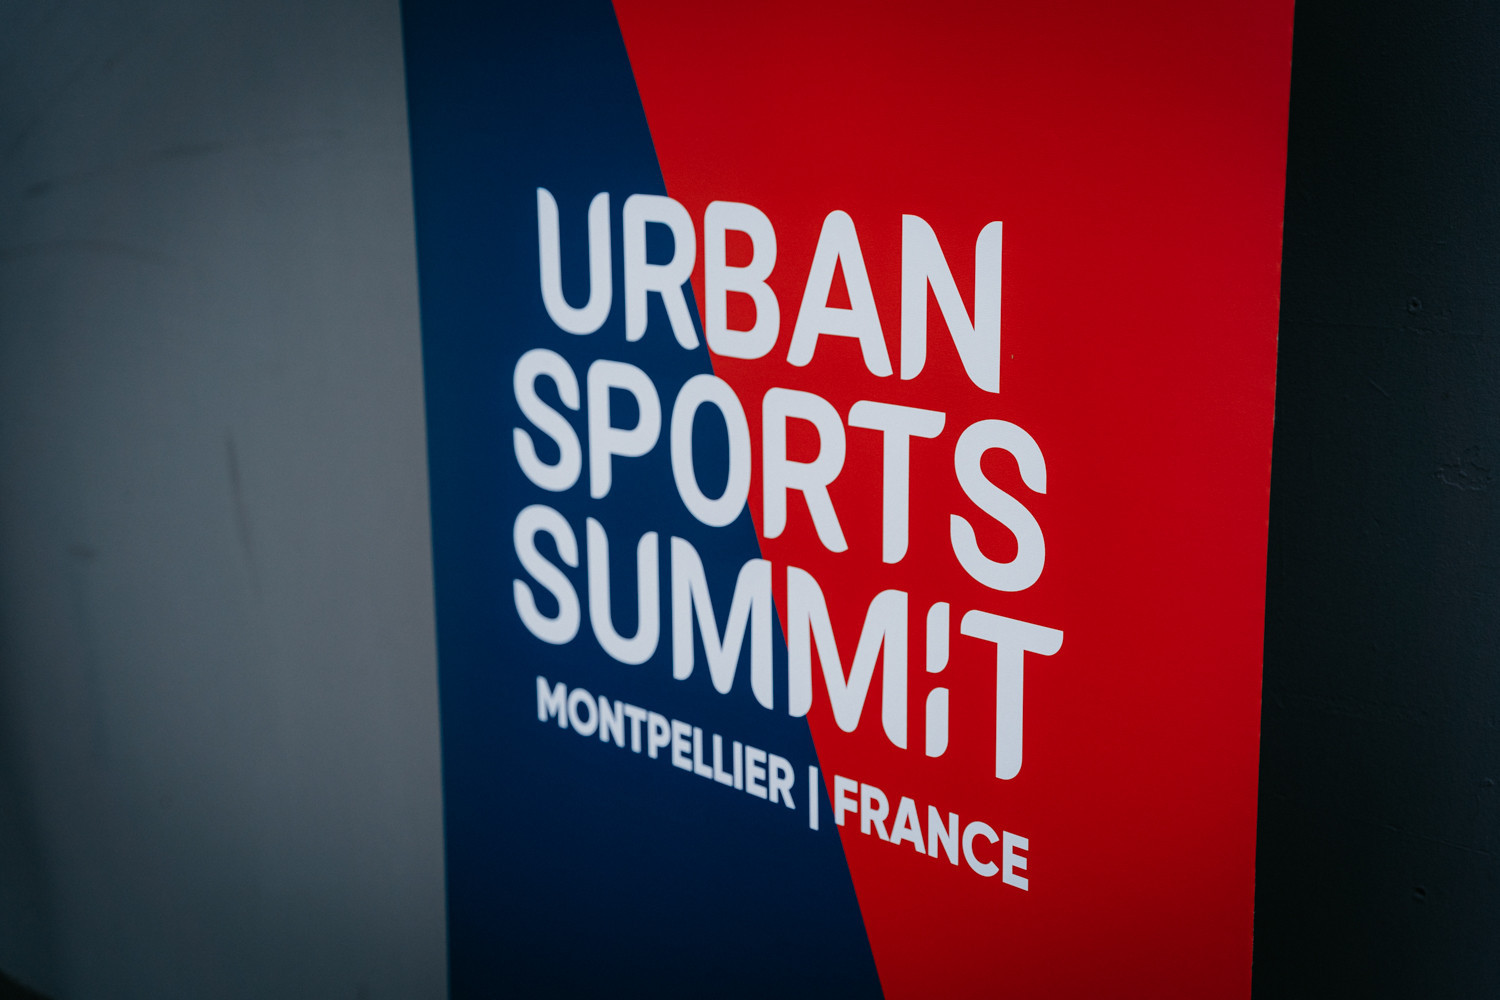 Montpellier staged the opening day of the long-awaited Urban Sports Summit following a three-year in-person hiatus enforced by COVID-19 ©Hurricane - FISE